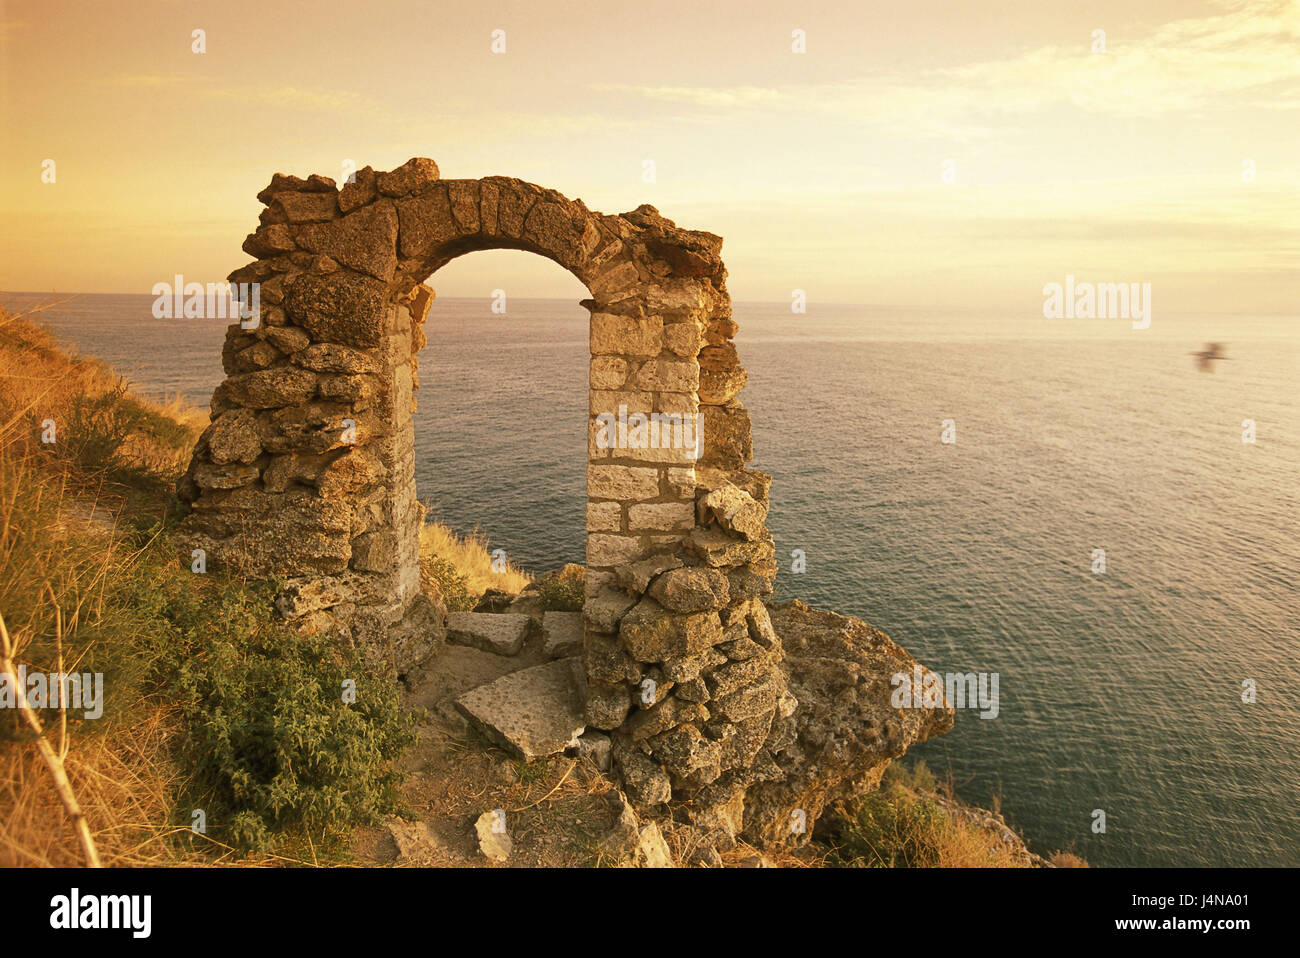 Bulgaria, cape Kaliakra, coast, ruin, archway, evening light, Black Sea coast, sea, cape, steep coast, ruins, gate, bow, stronghold, defensive wall leftovers, stone bows, width, horizon, lookout, place of interest, story, past, structure, remains, icon, expiration, transitoriness, tuning, evening, Stock Photo